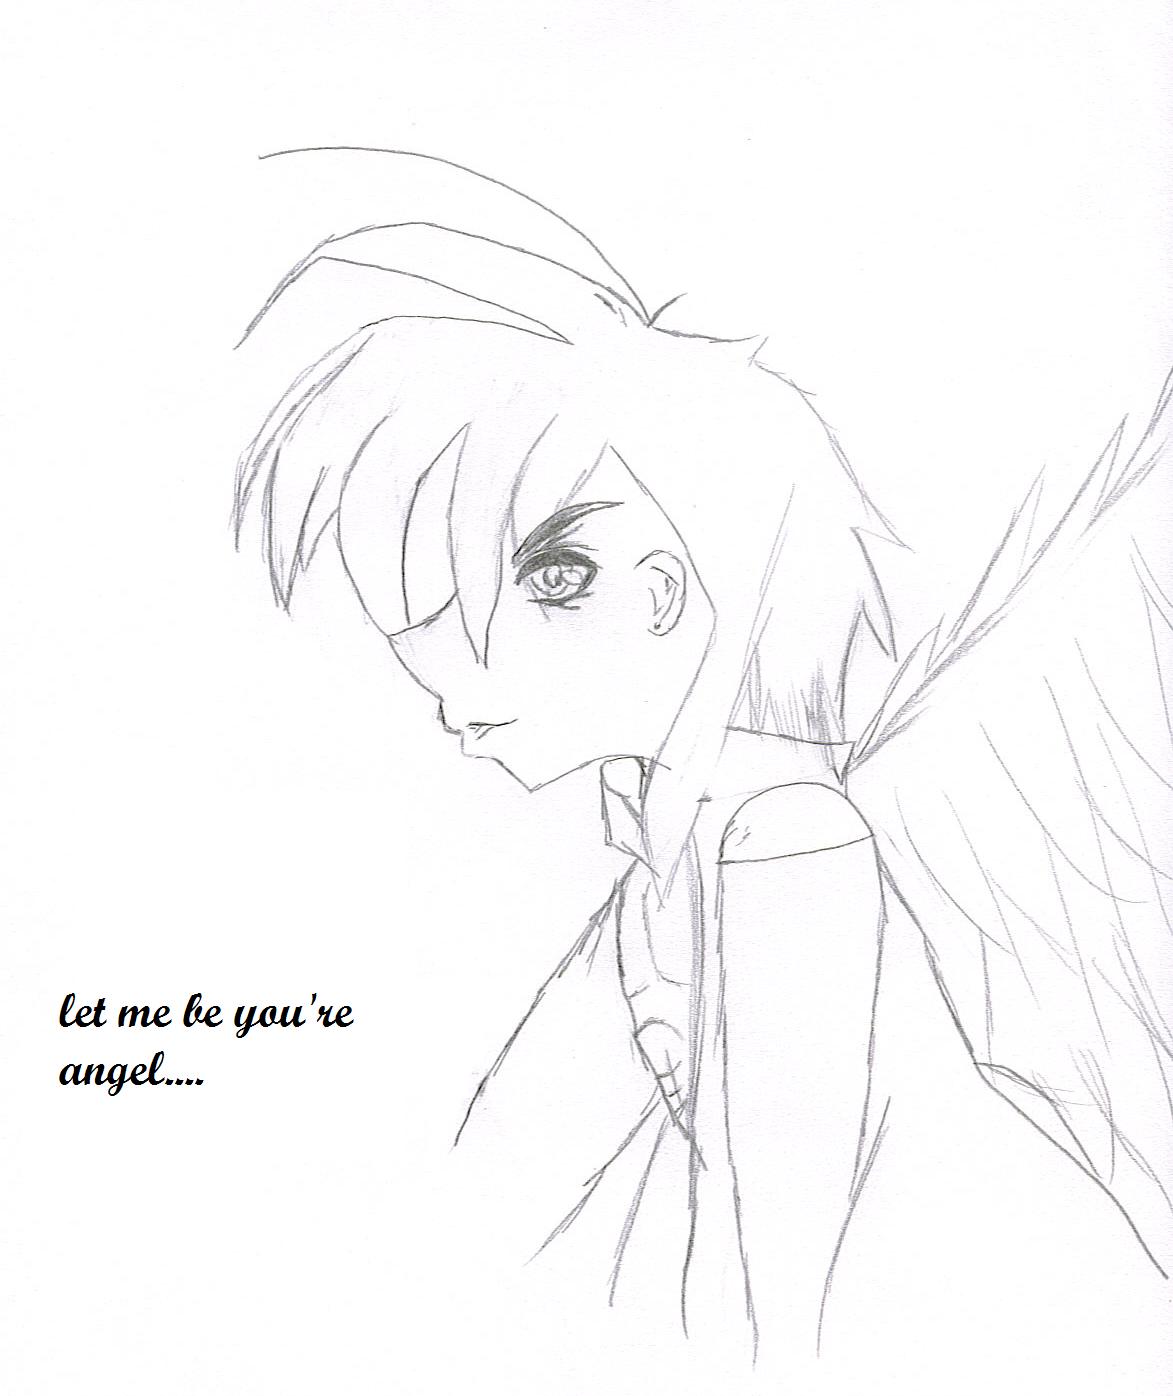 "Let me be you're angel"  staring DARK! by Keito-Chan